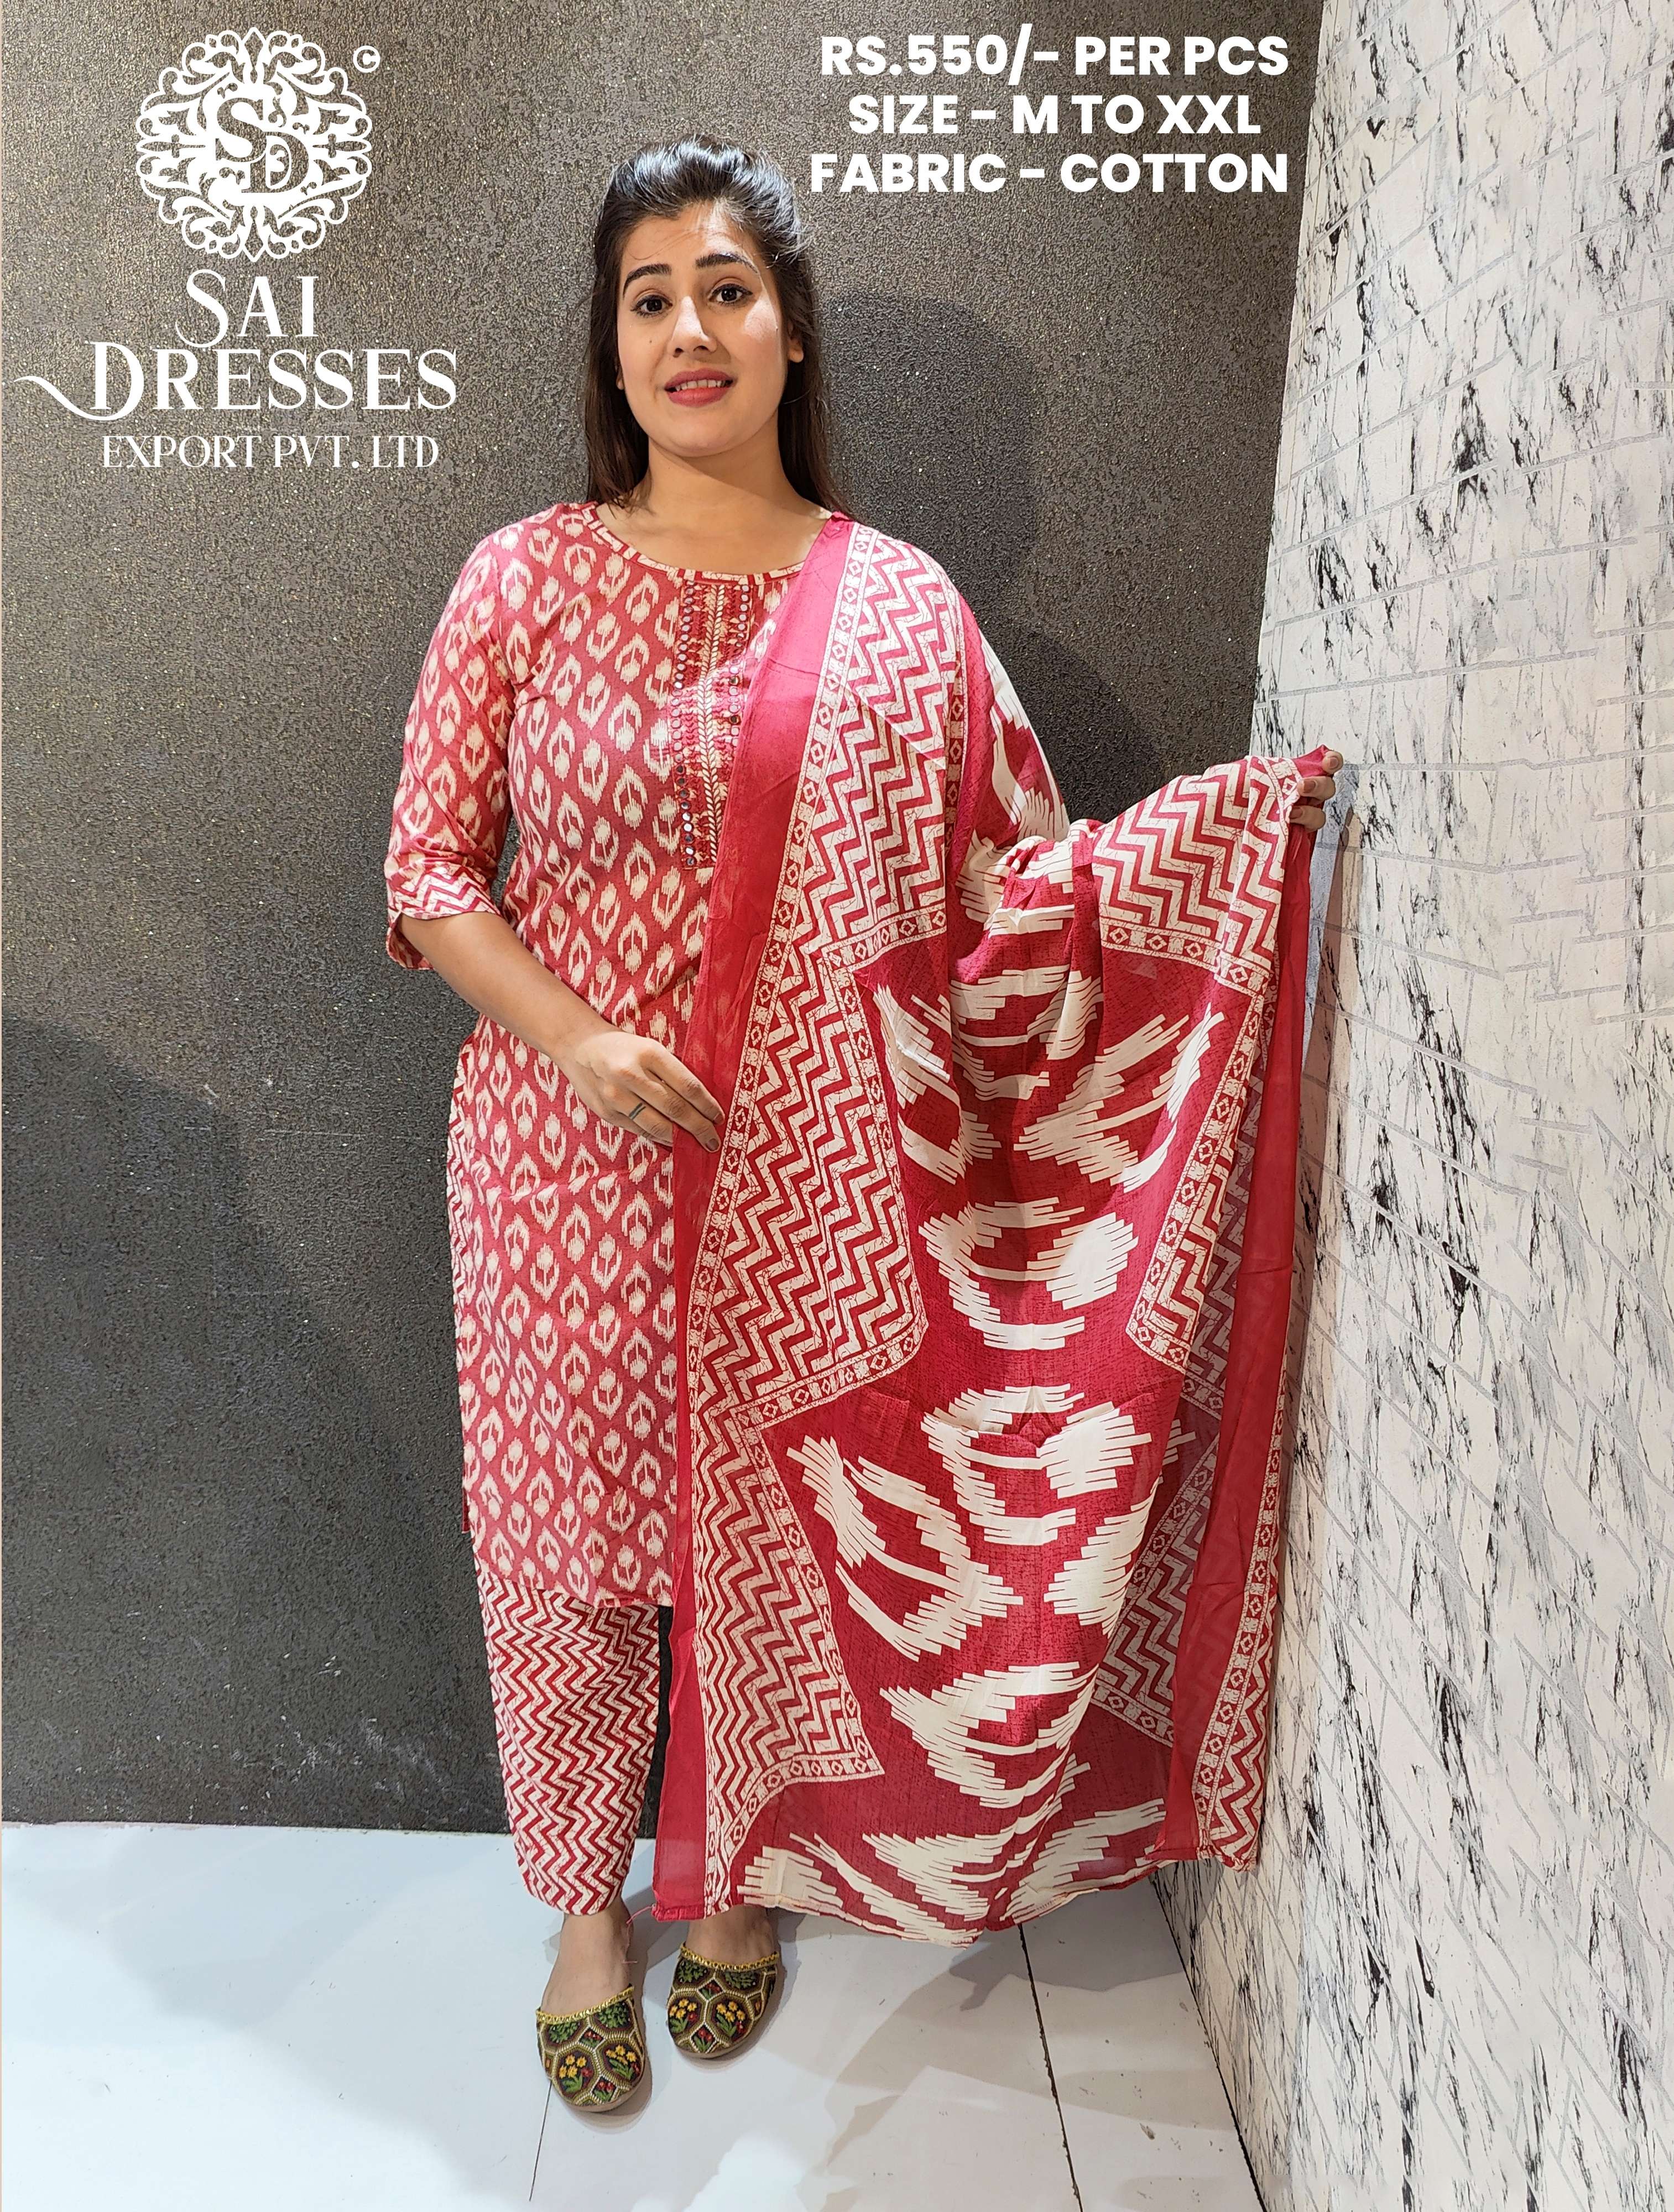 SAI DRESSES PRESENT D.NO 27 READY TO EXCLUSIVE DAILY WEAR PANT STYLE COTTON PRINTED COMBO SUITS IN WHOLESALE RATE IN SURAT